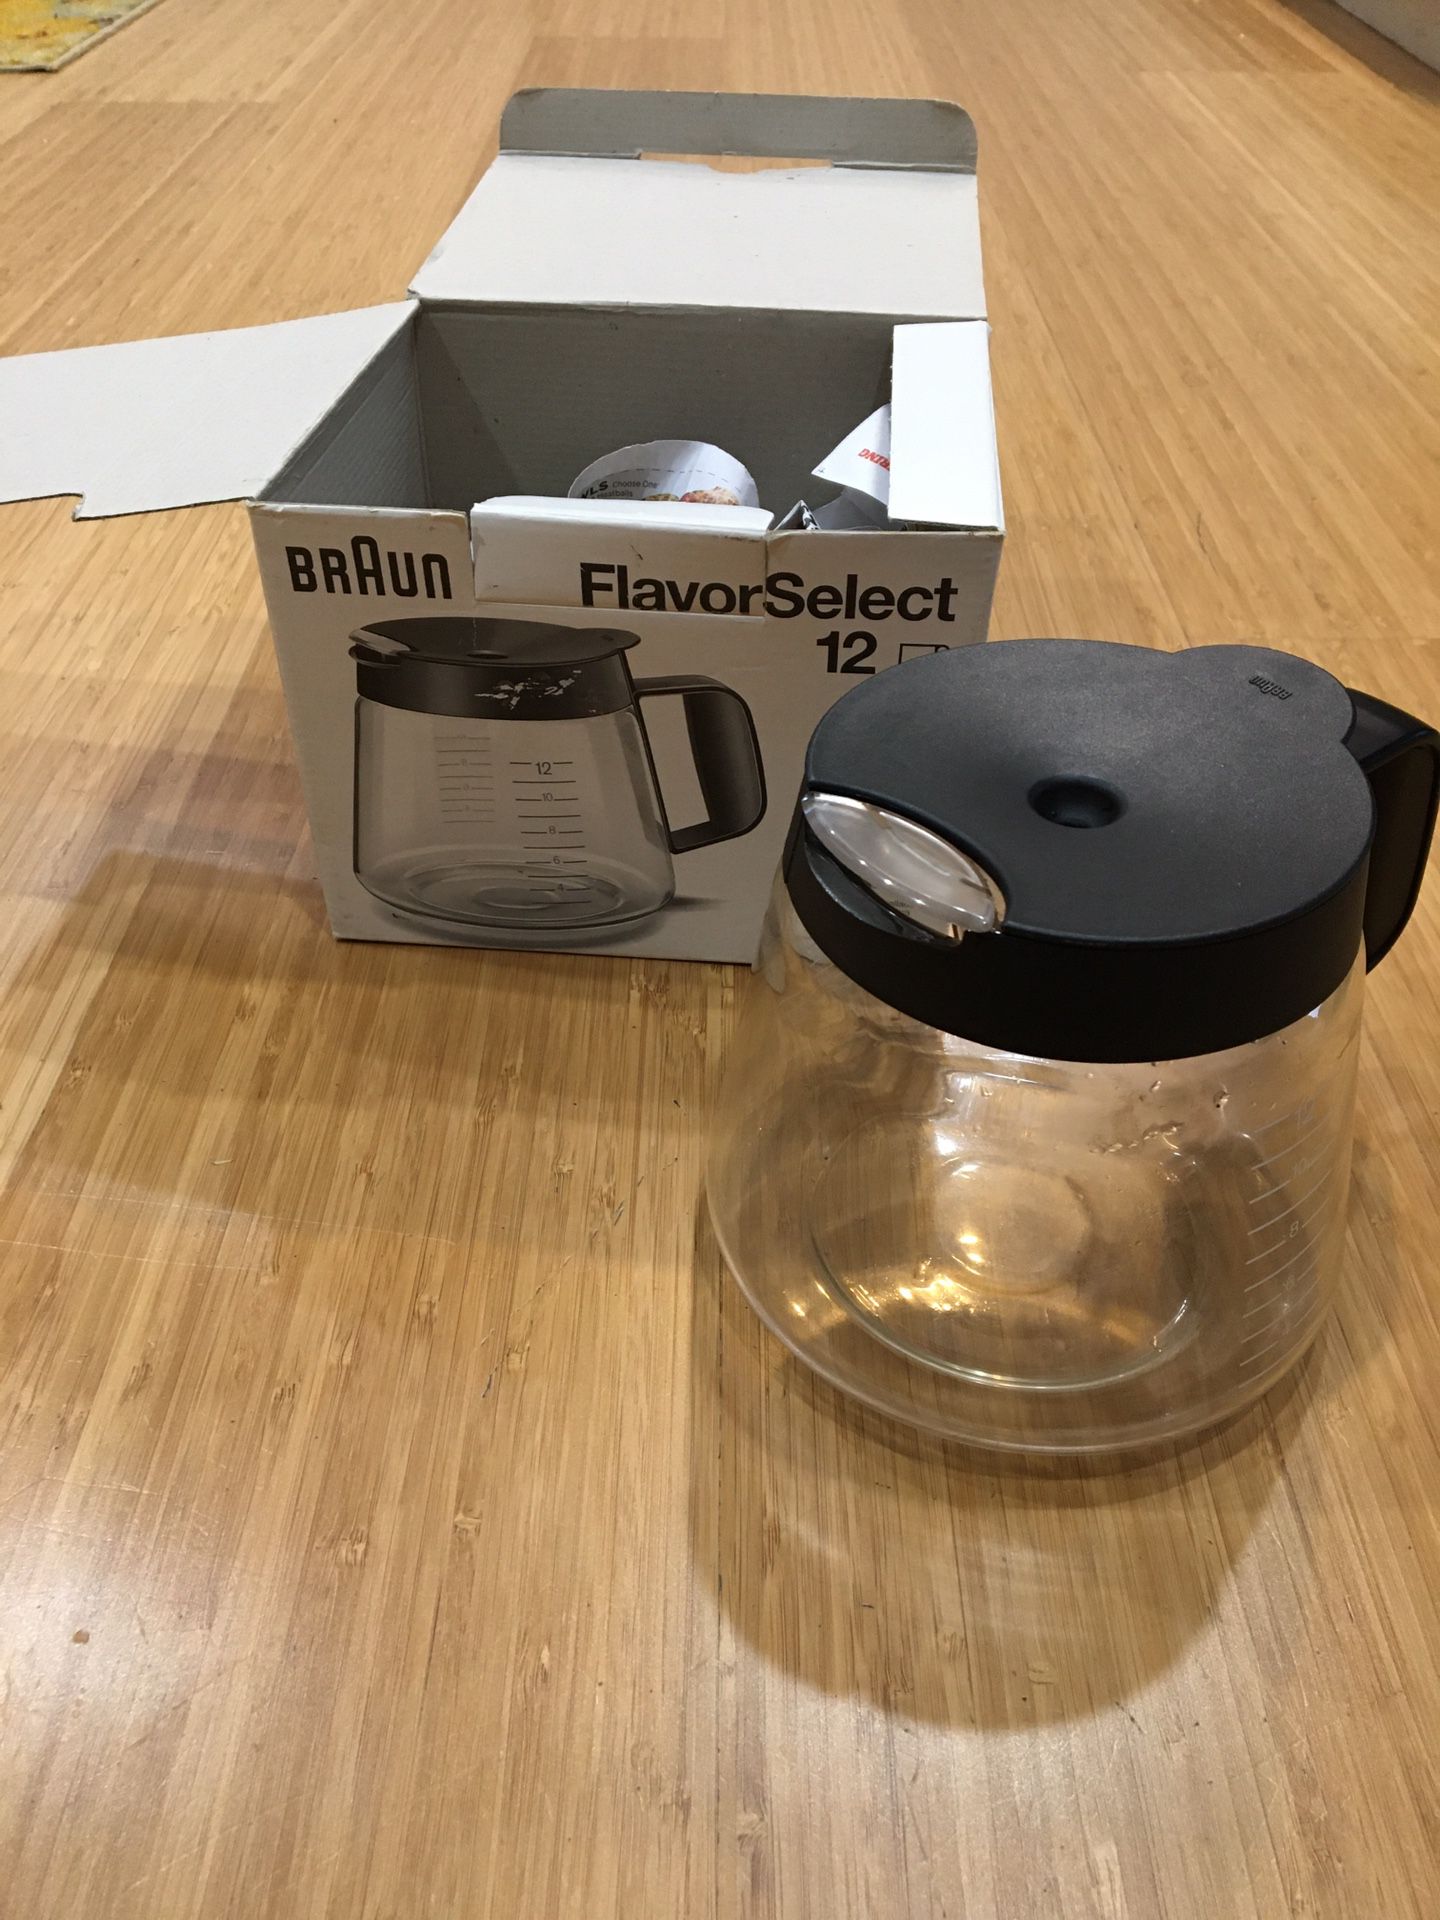 Braun 12cup Flavor Select coffee maker replacement carafe.